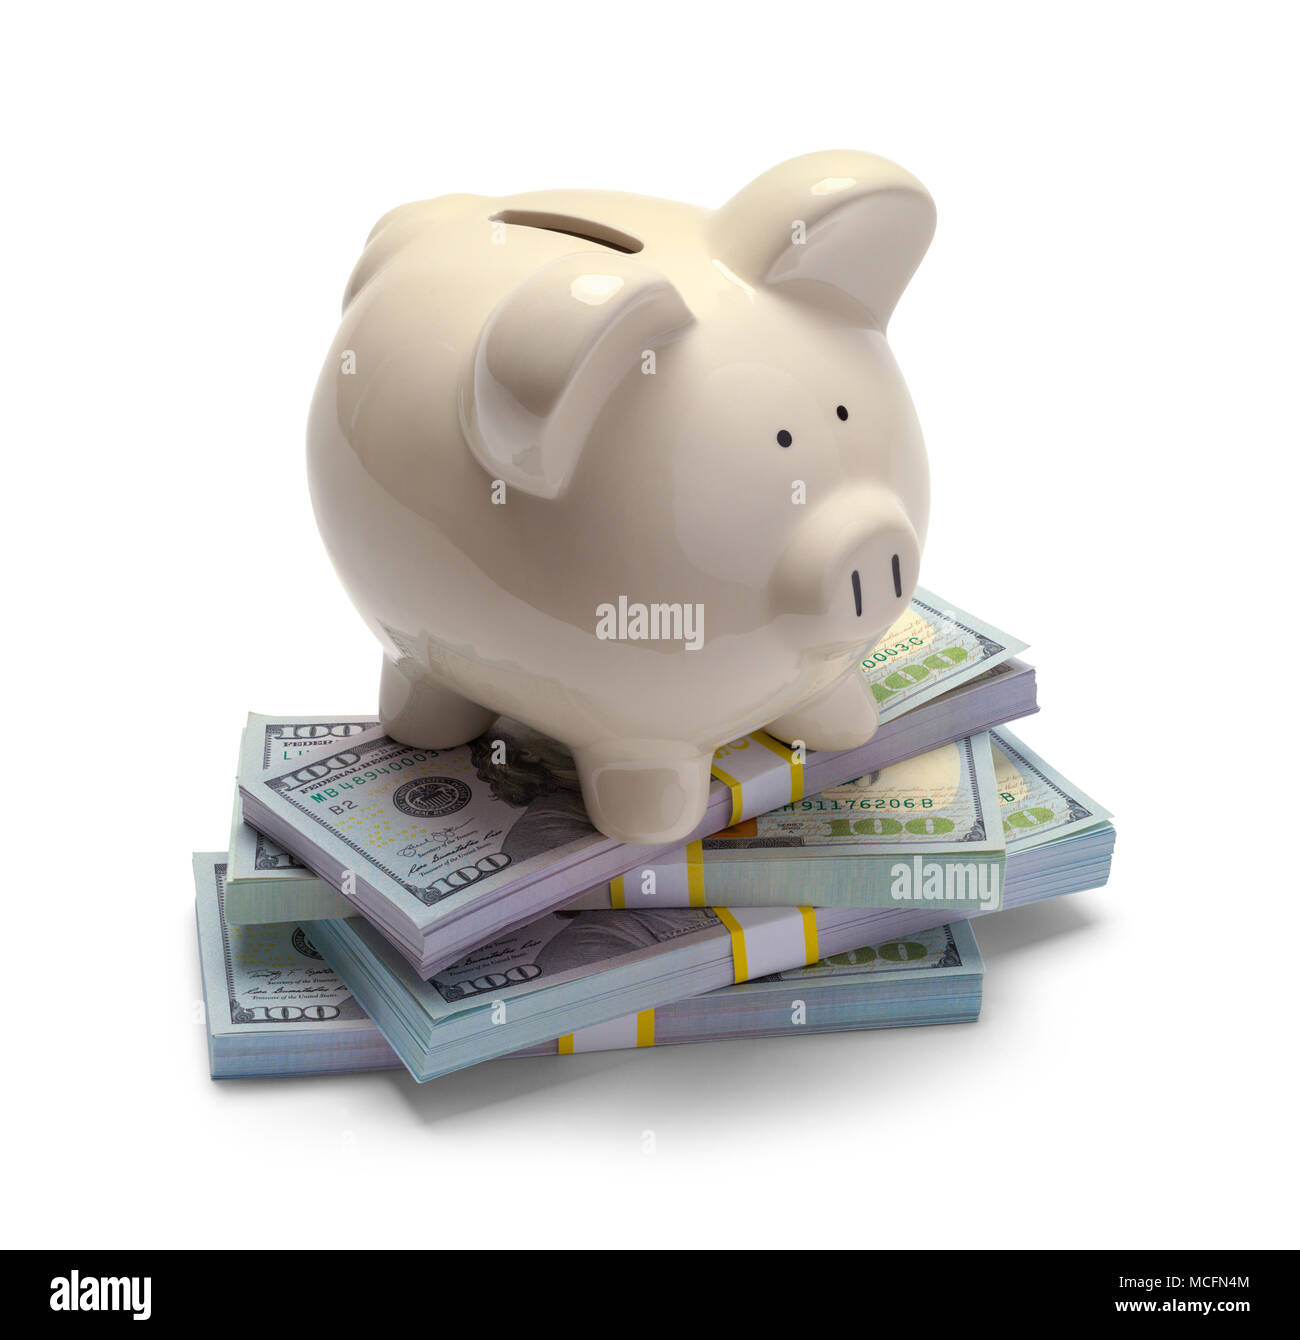 Pile of Money with a Piggy Bank on Top Isolated on a White Background. Stock Photo